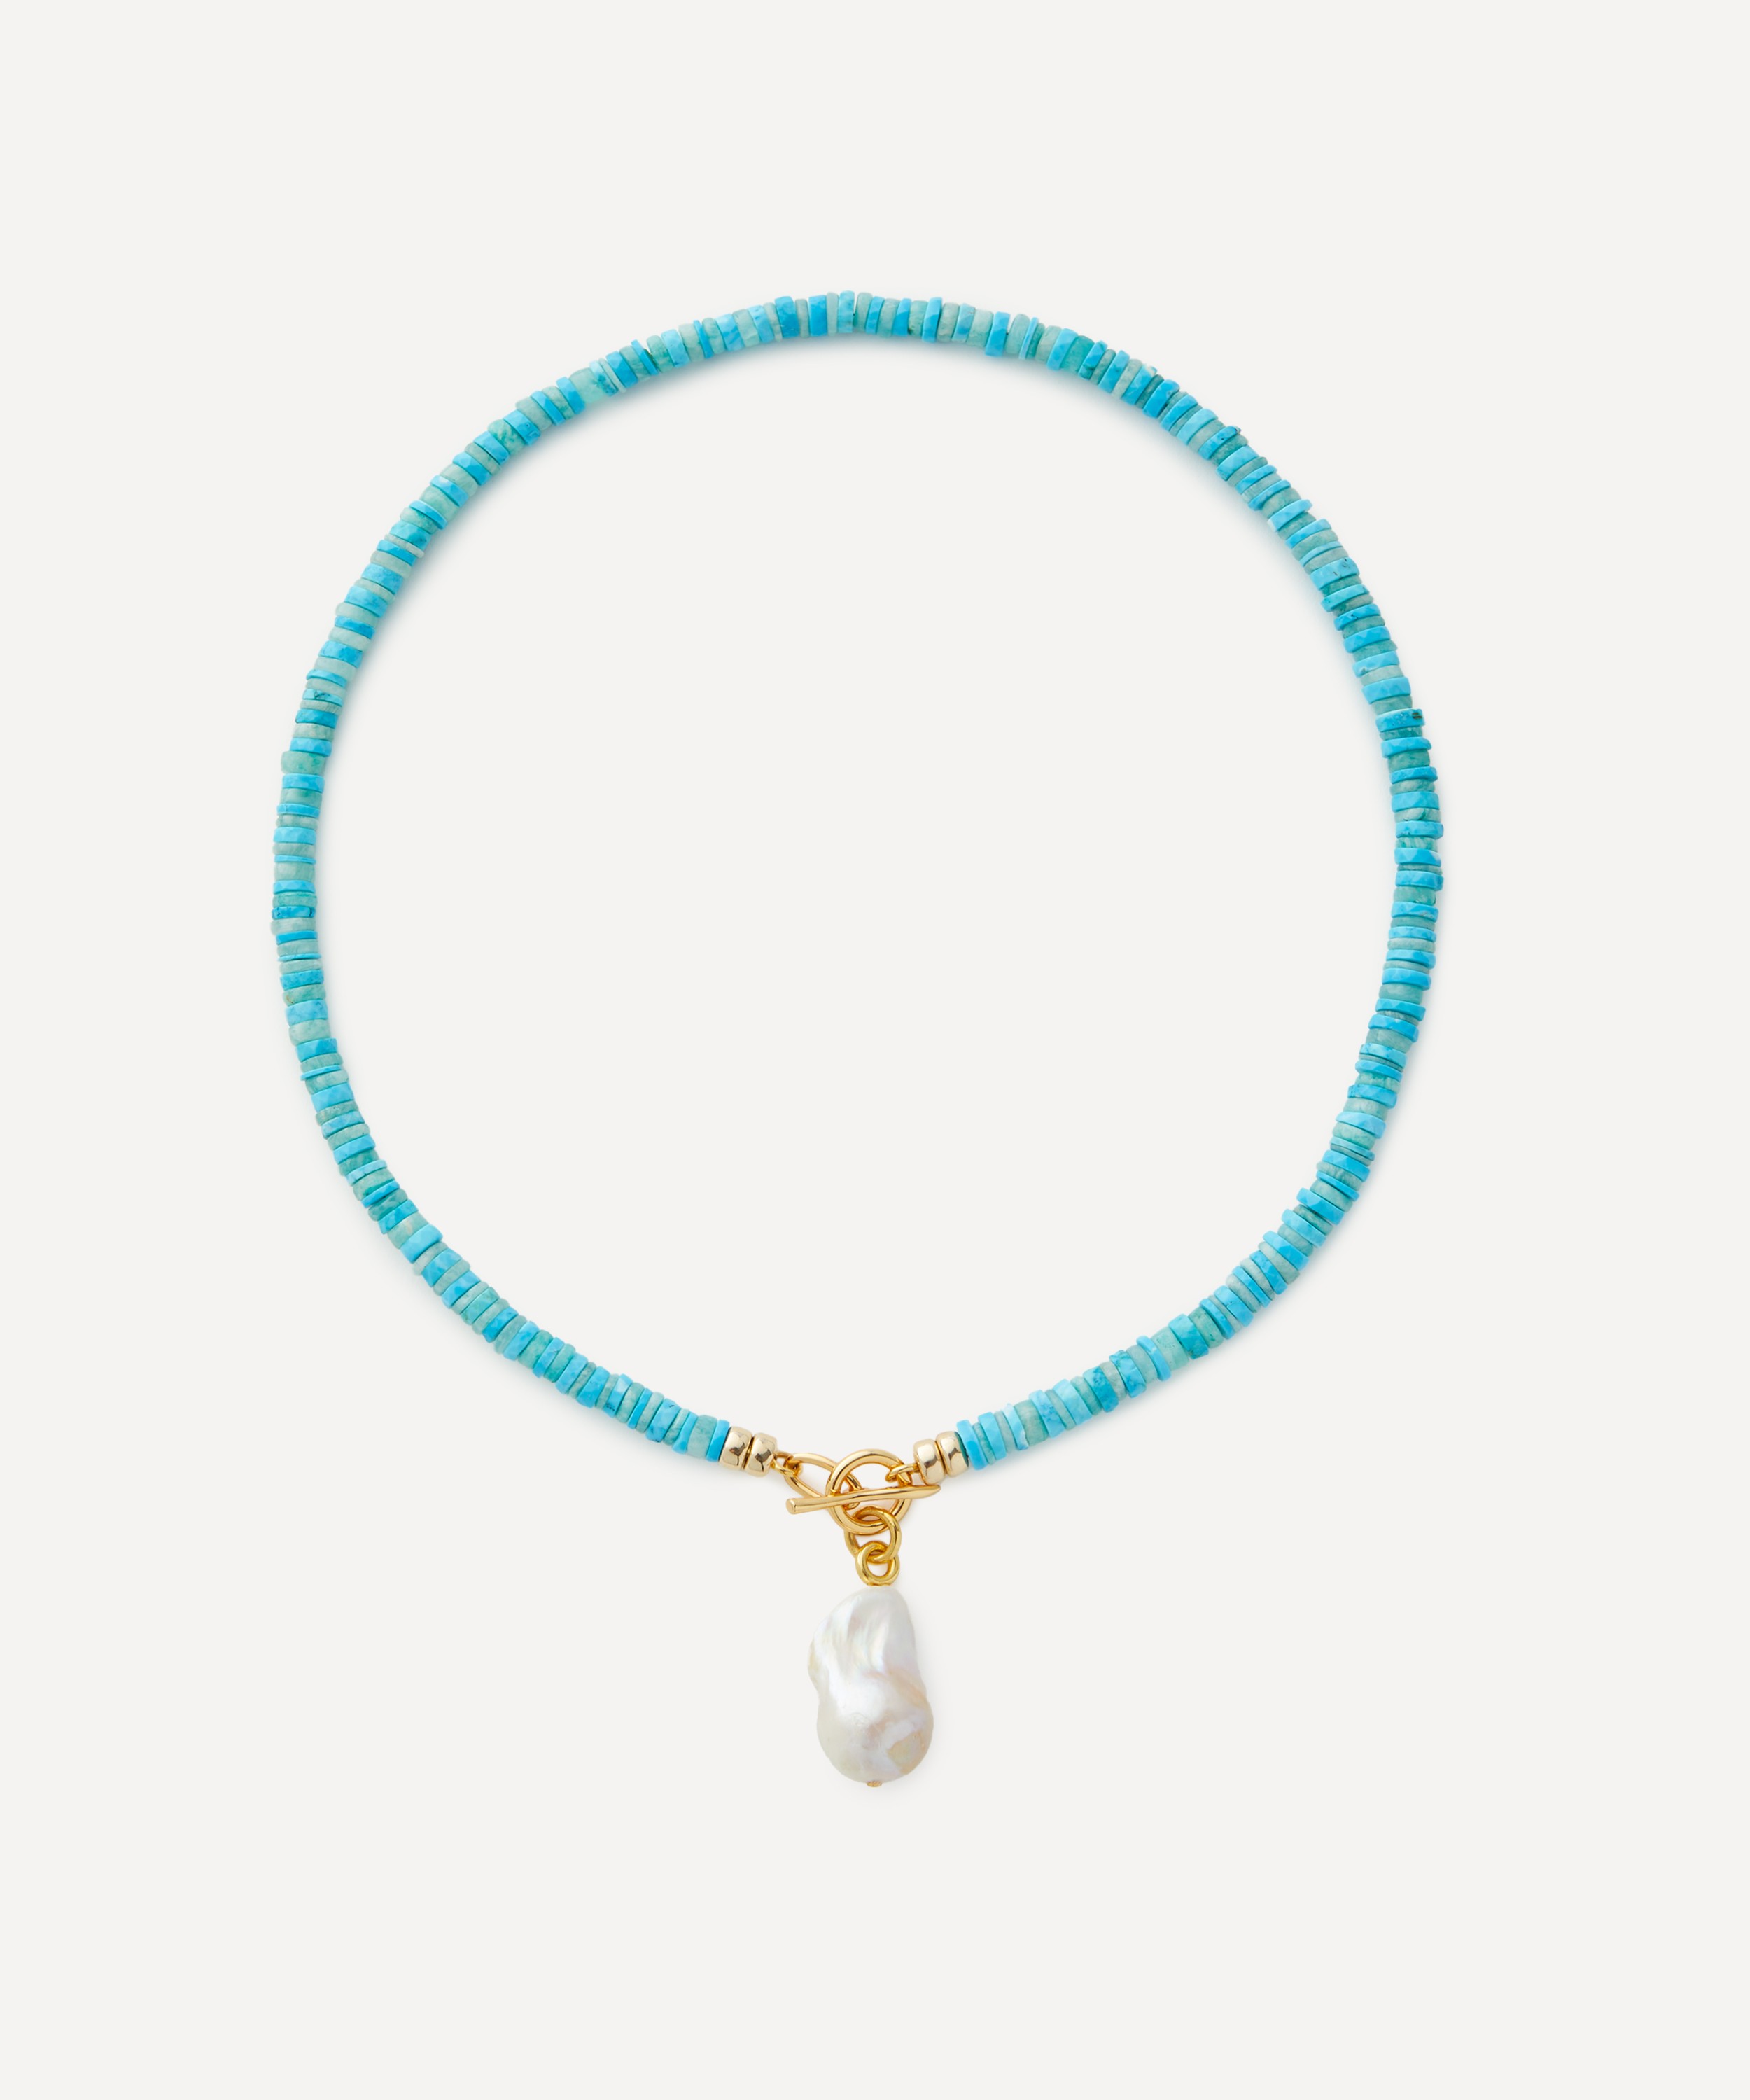 Lizzie Fortunato - Gold-Plated Pearl Isle Bead Necklace